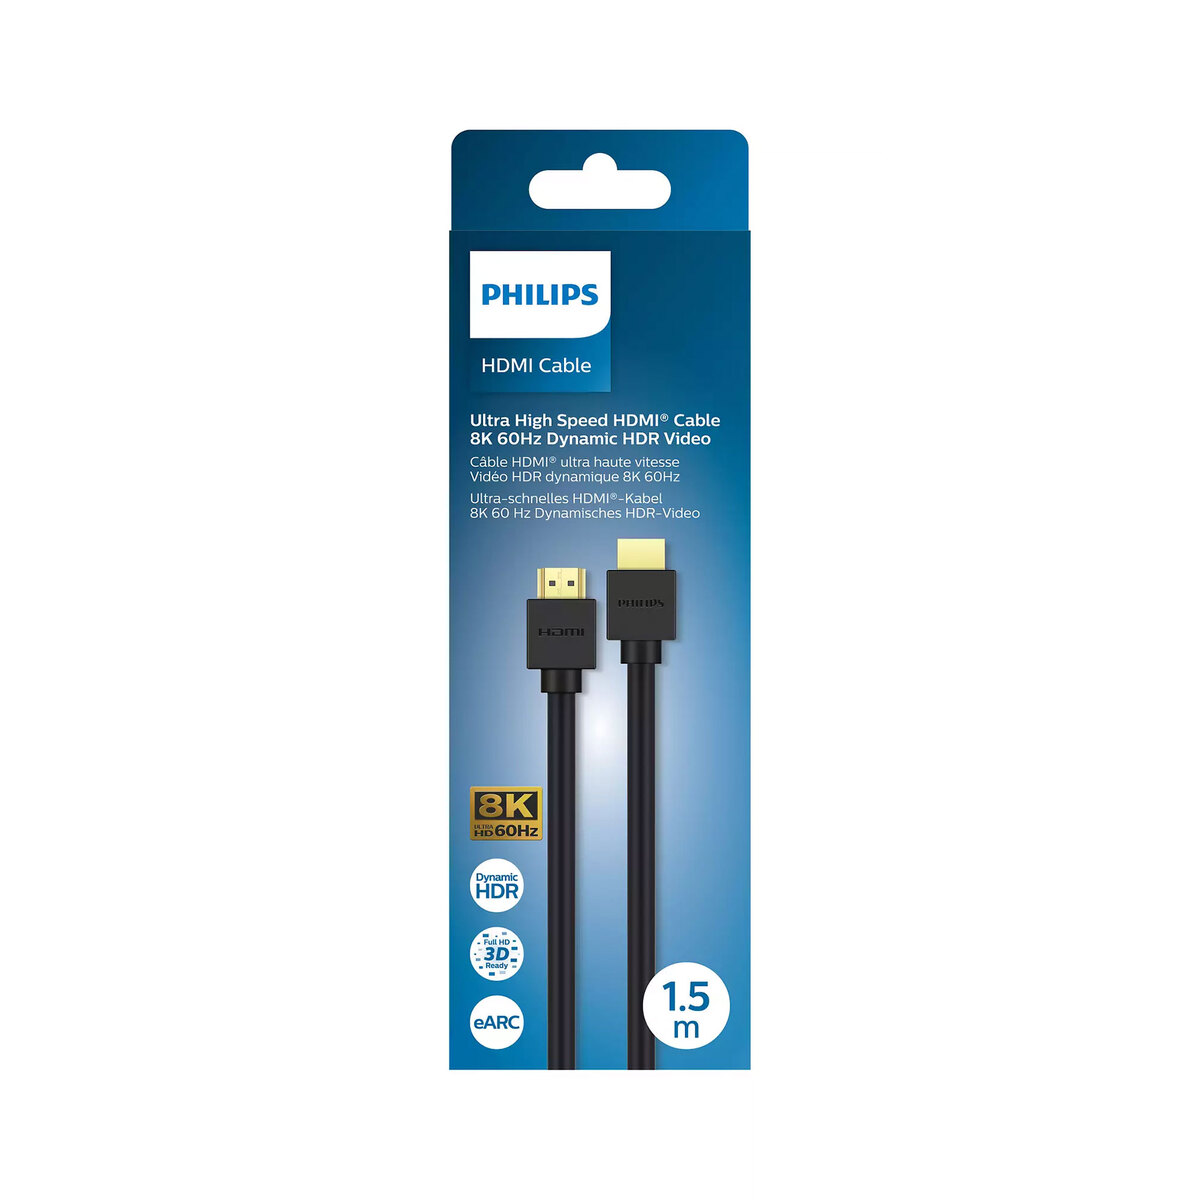 Philips 2.1 8K 60Hz Dynamic HDR HDMI Cable 1.5m Black